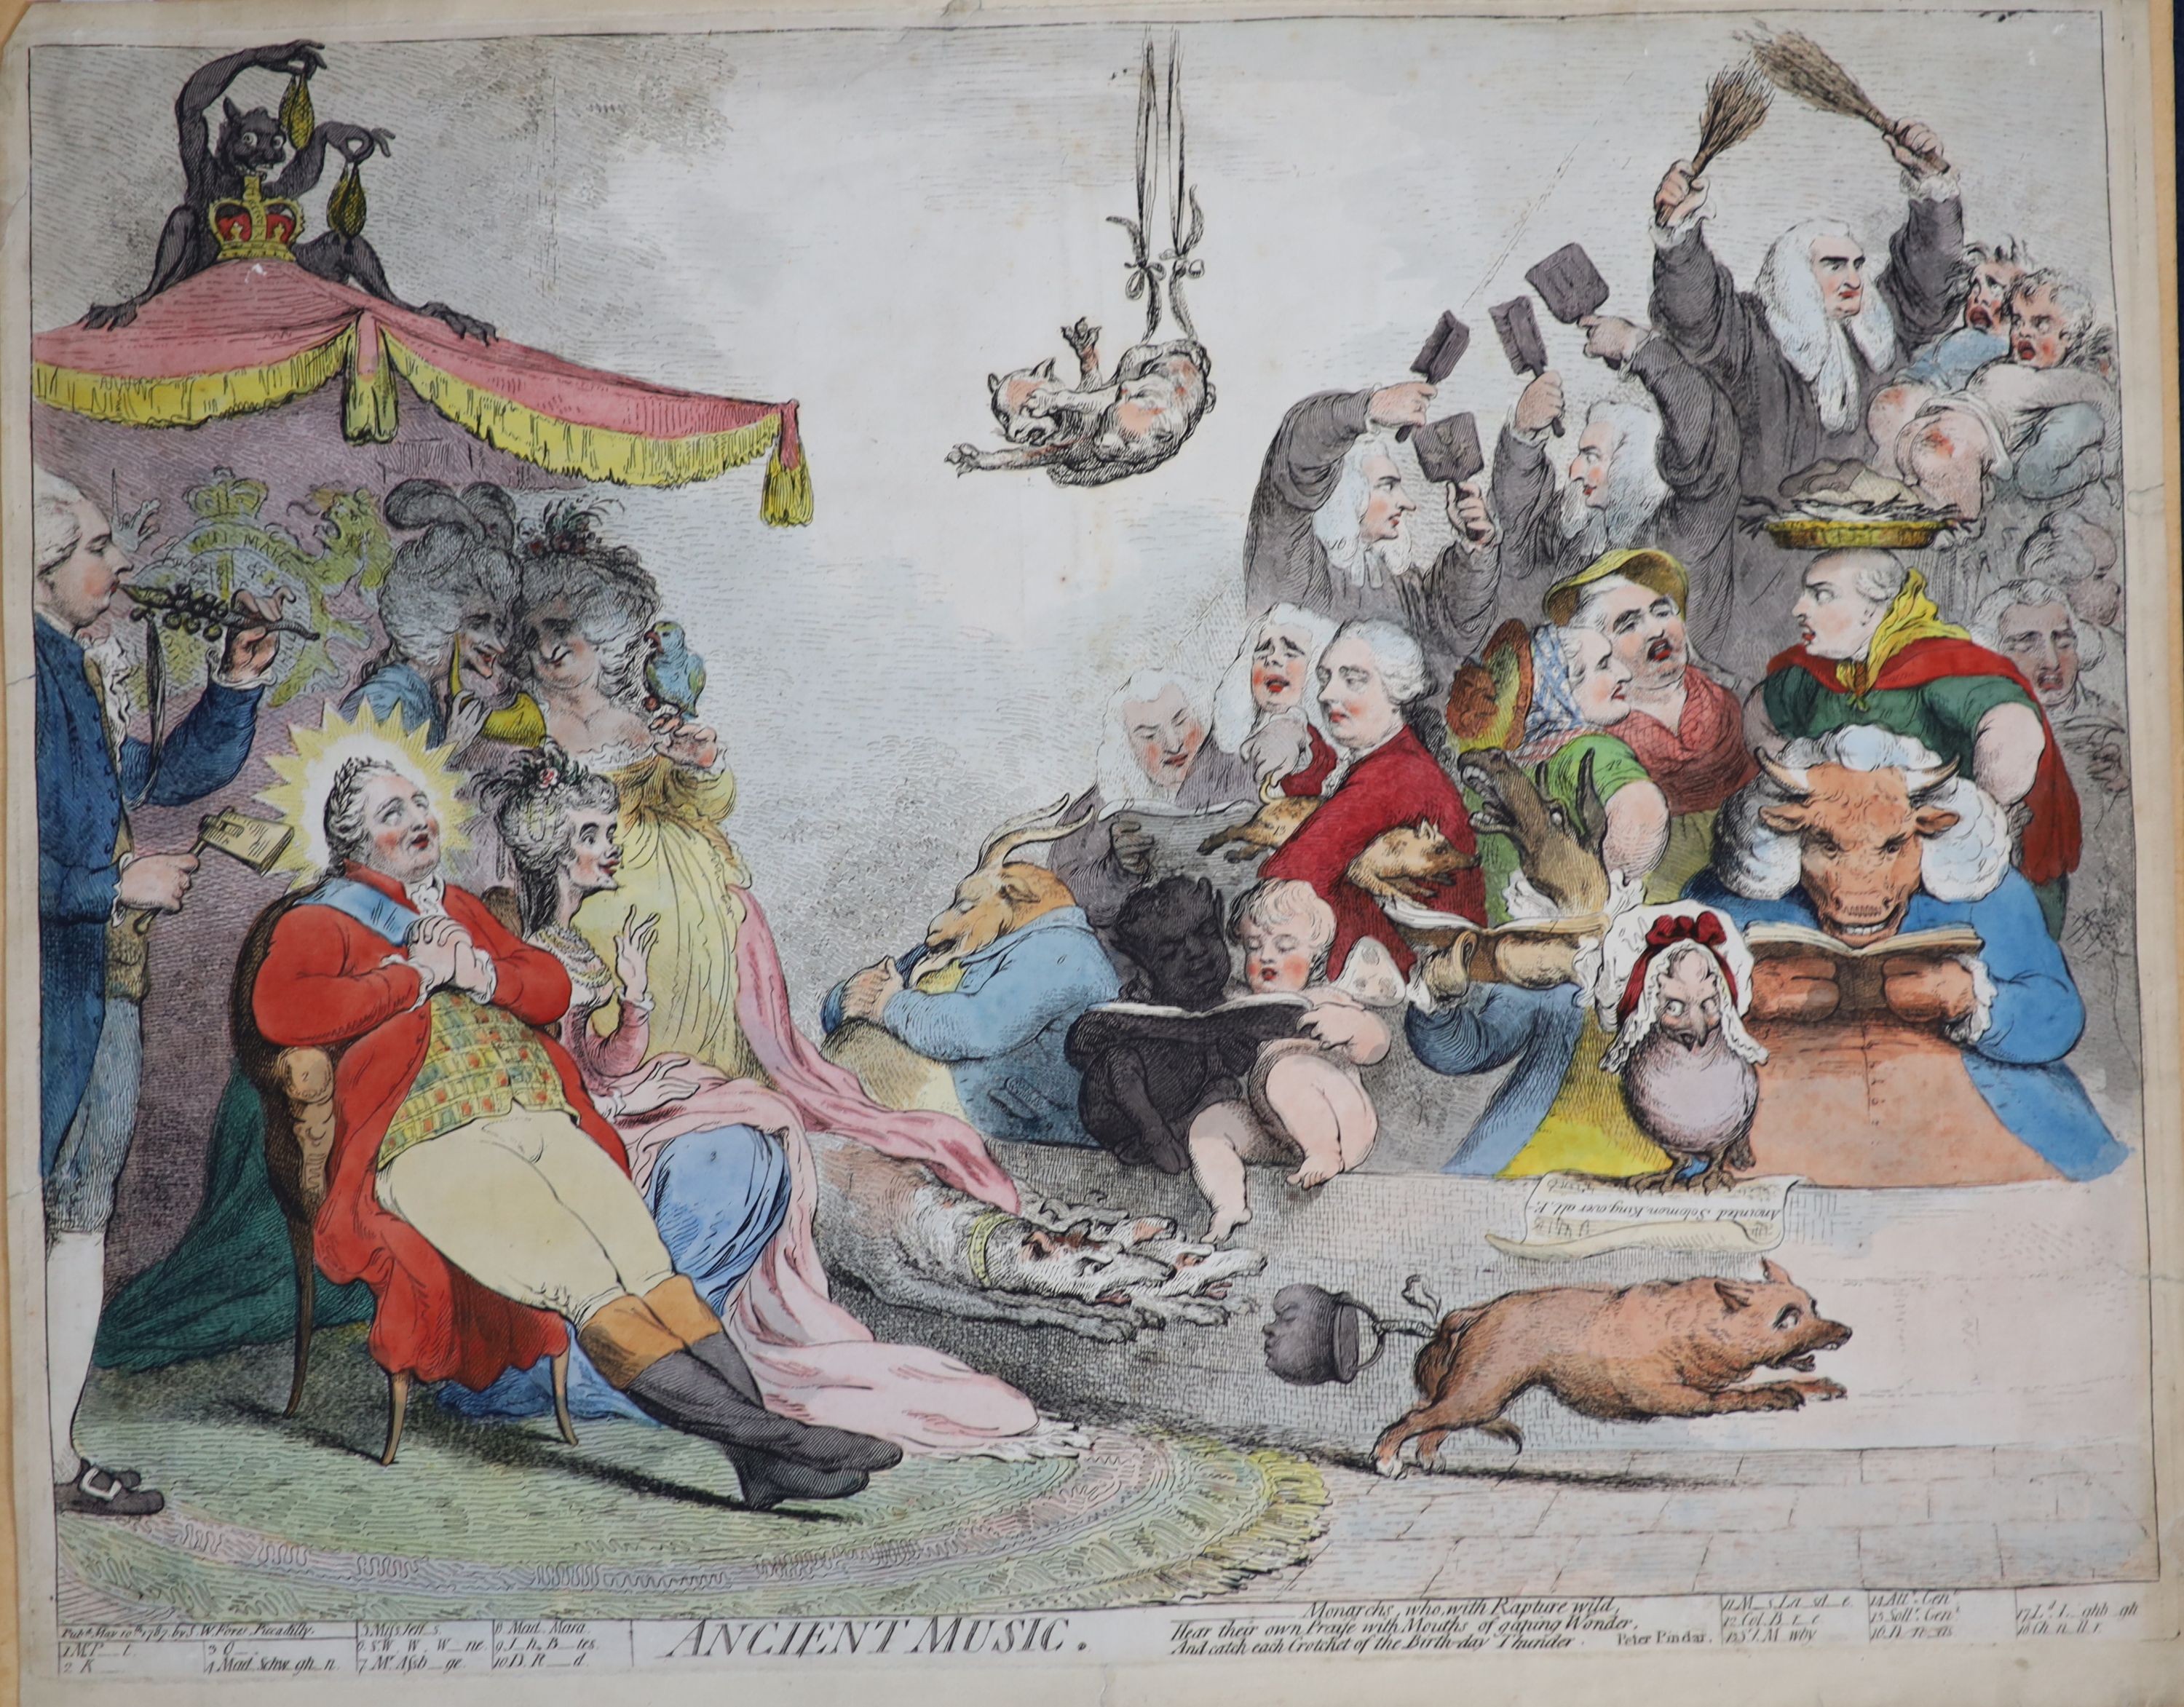 James Gillray (1757-1815), New Morality, The Bishop of A Tun’s Breeches, Making Decent, Frying Sprats/Toasting Muffins, The King of Brobdingnag, Charlotte la Corde, The Reception of the Diplomatique, The State Waggoner,